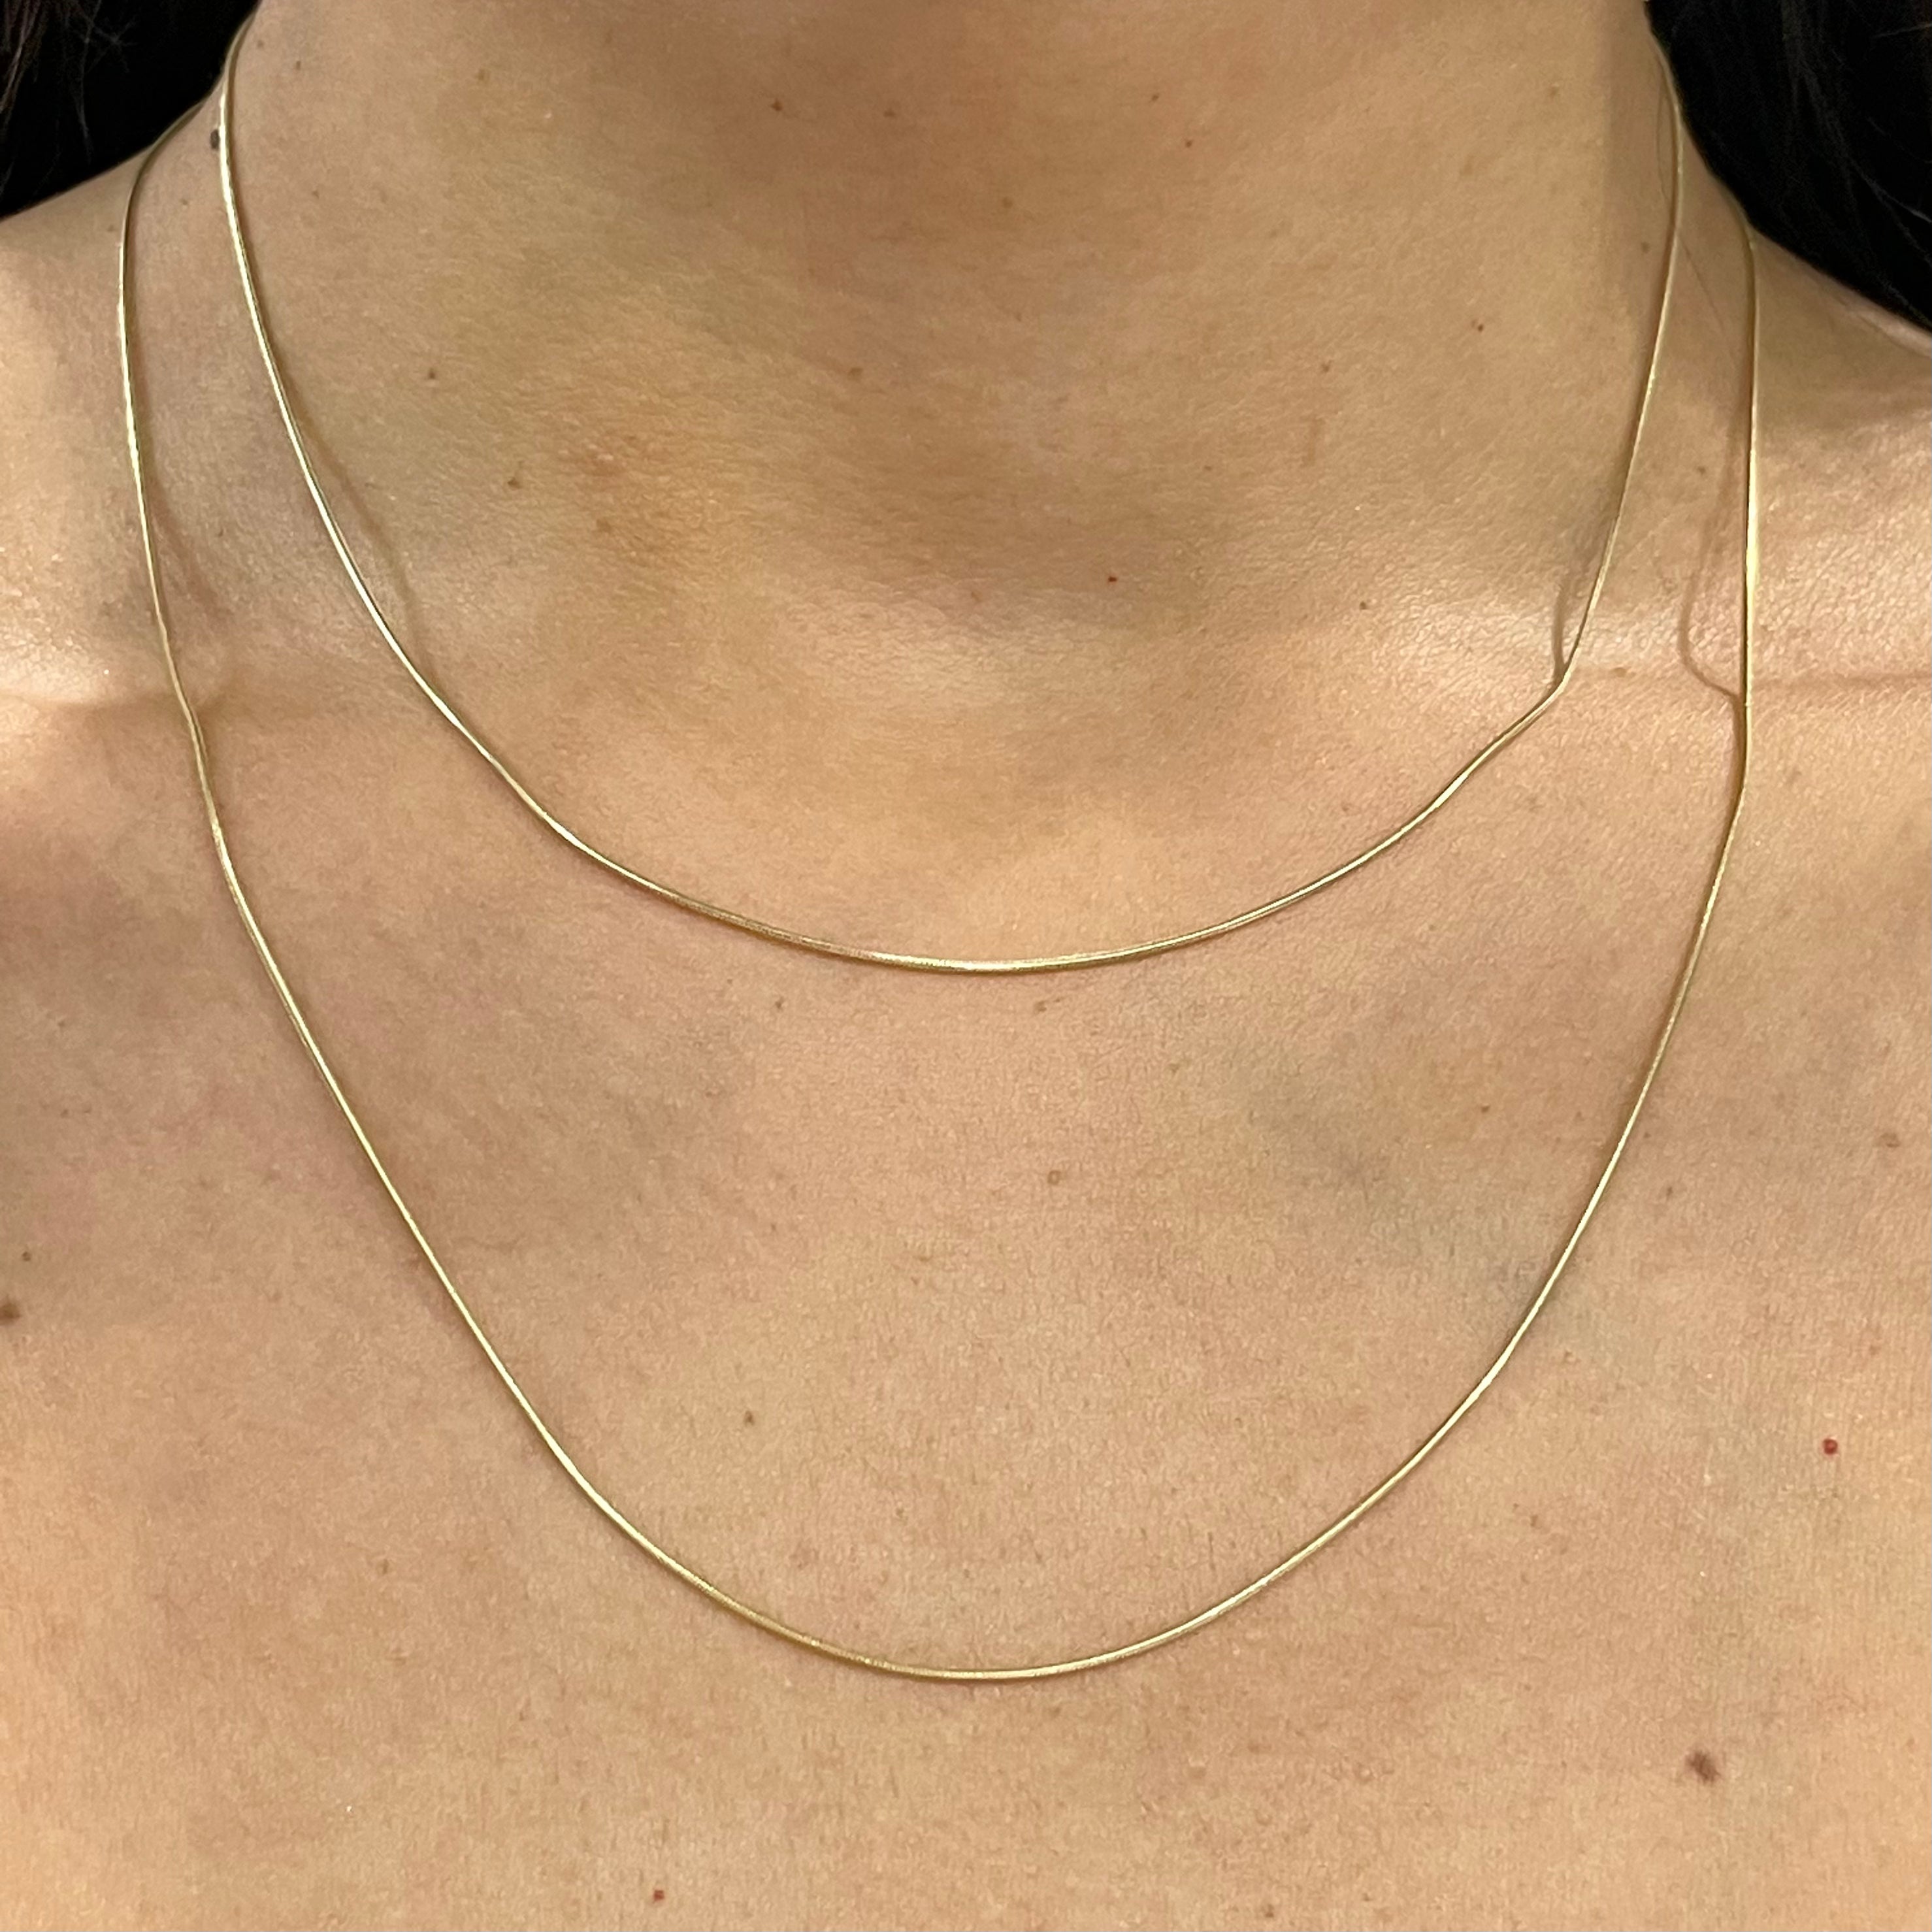 16” 14k Yellow Gold Snake Chain Necklace